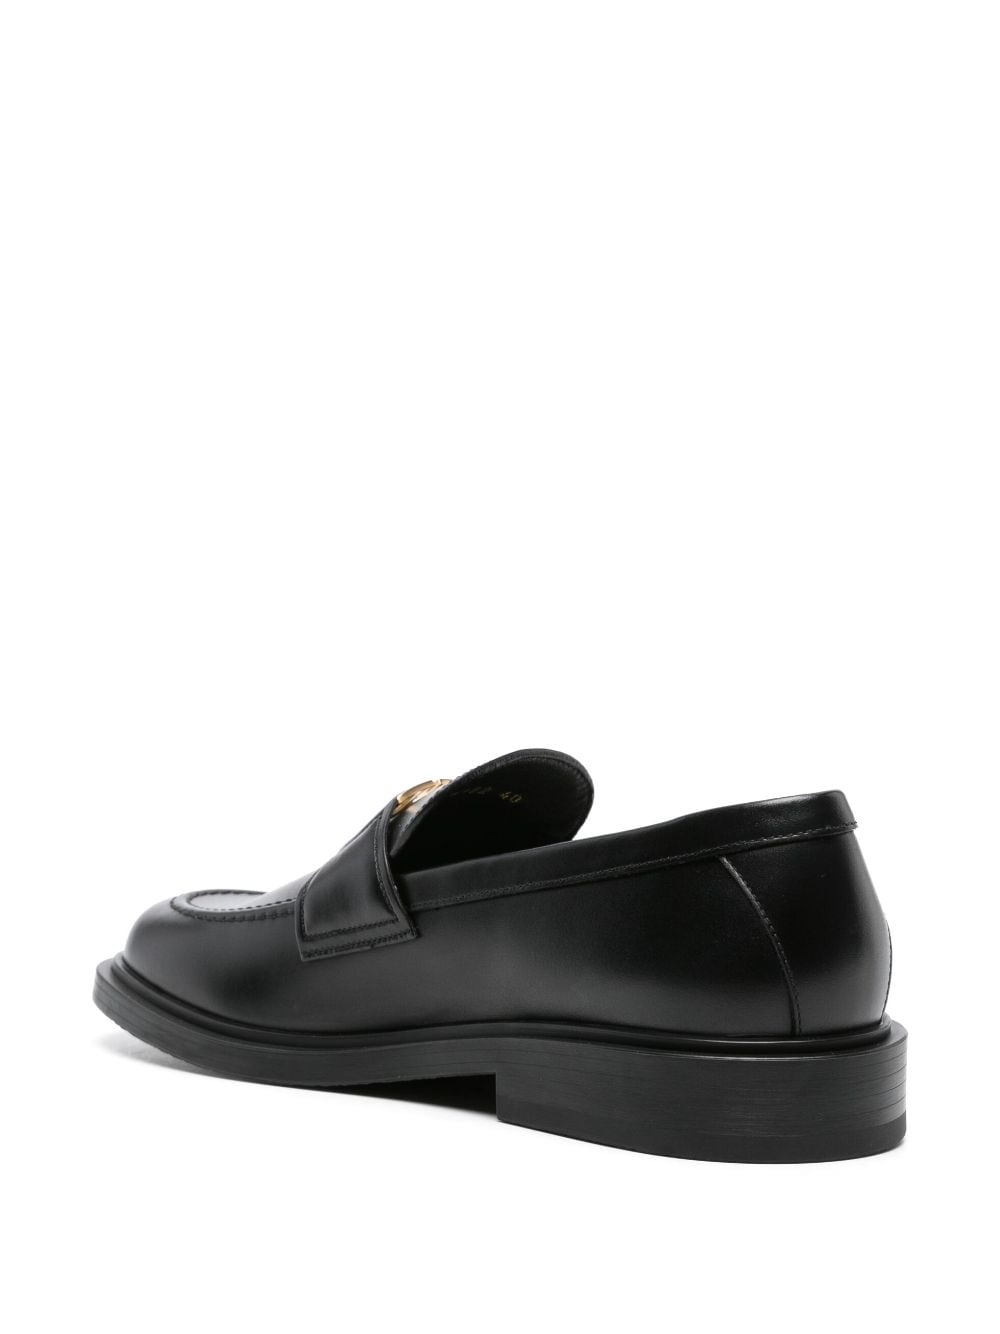 VLogo leather loafers - 3